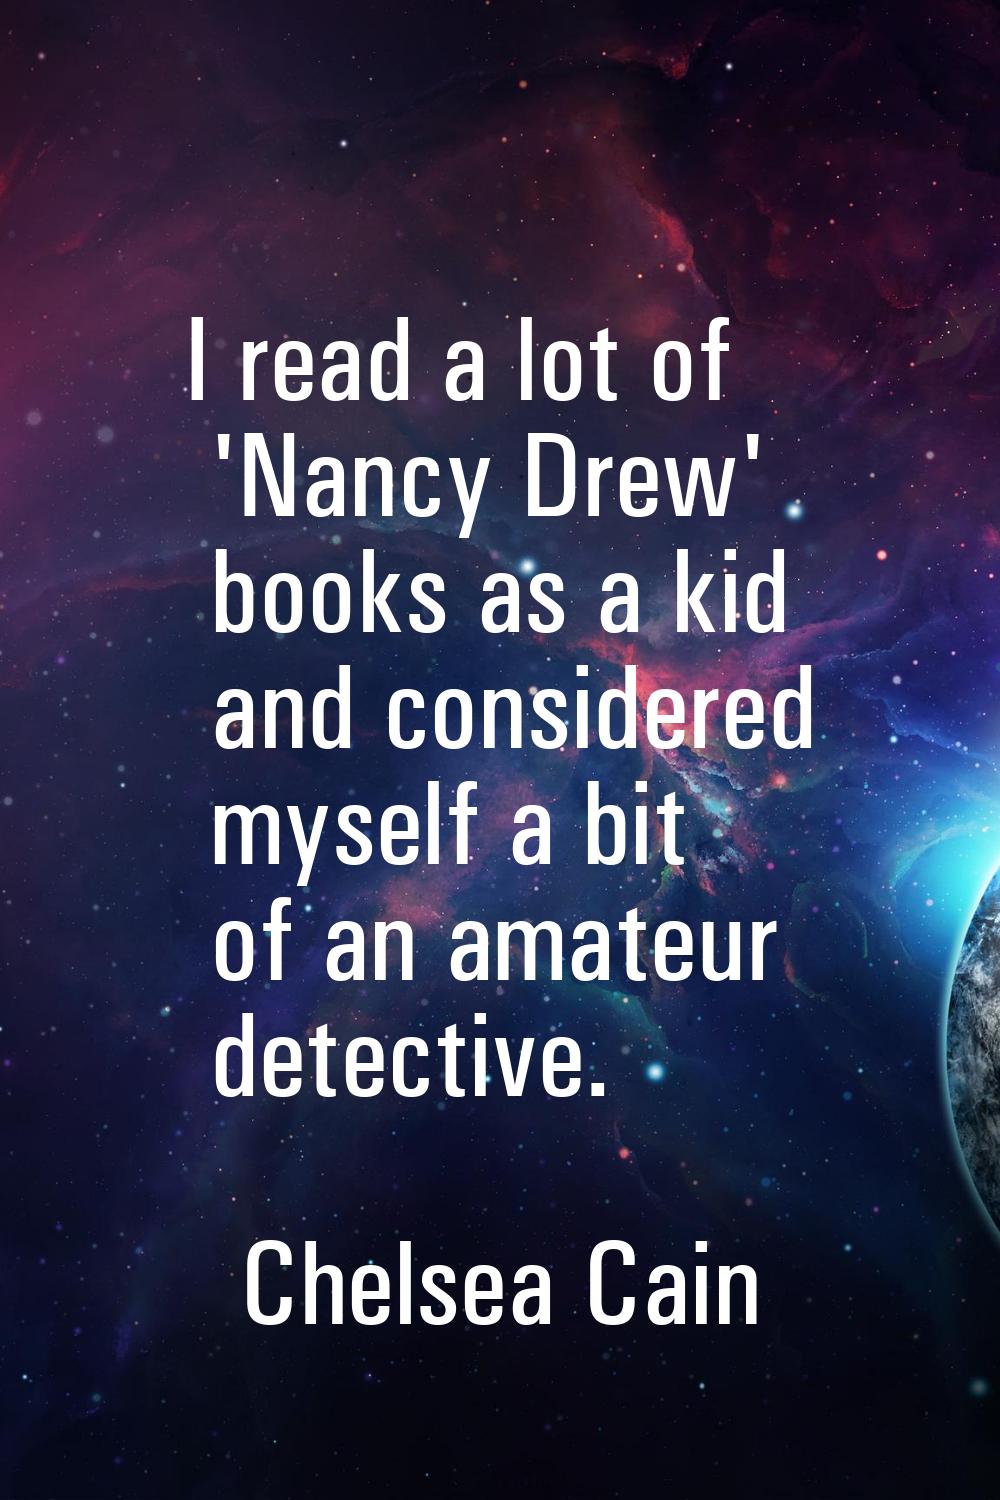 I read a lot of 'Nancy Drew' books as a kid and considered myself a bit of an amateur detective.